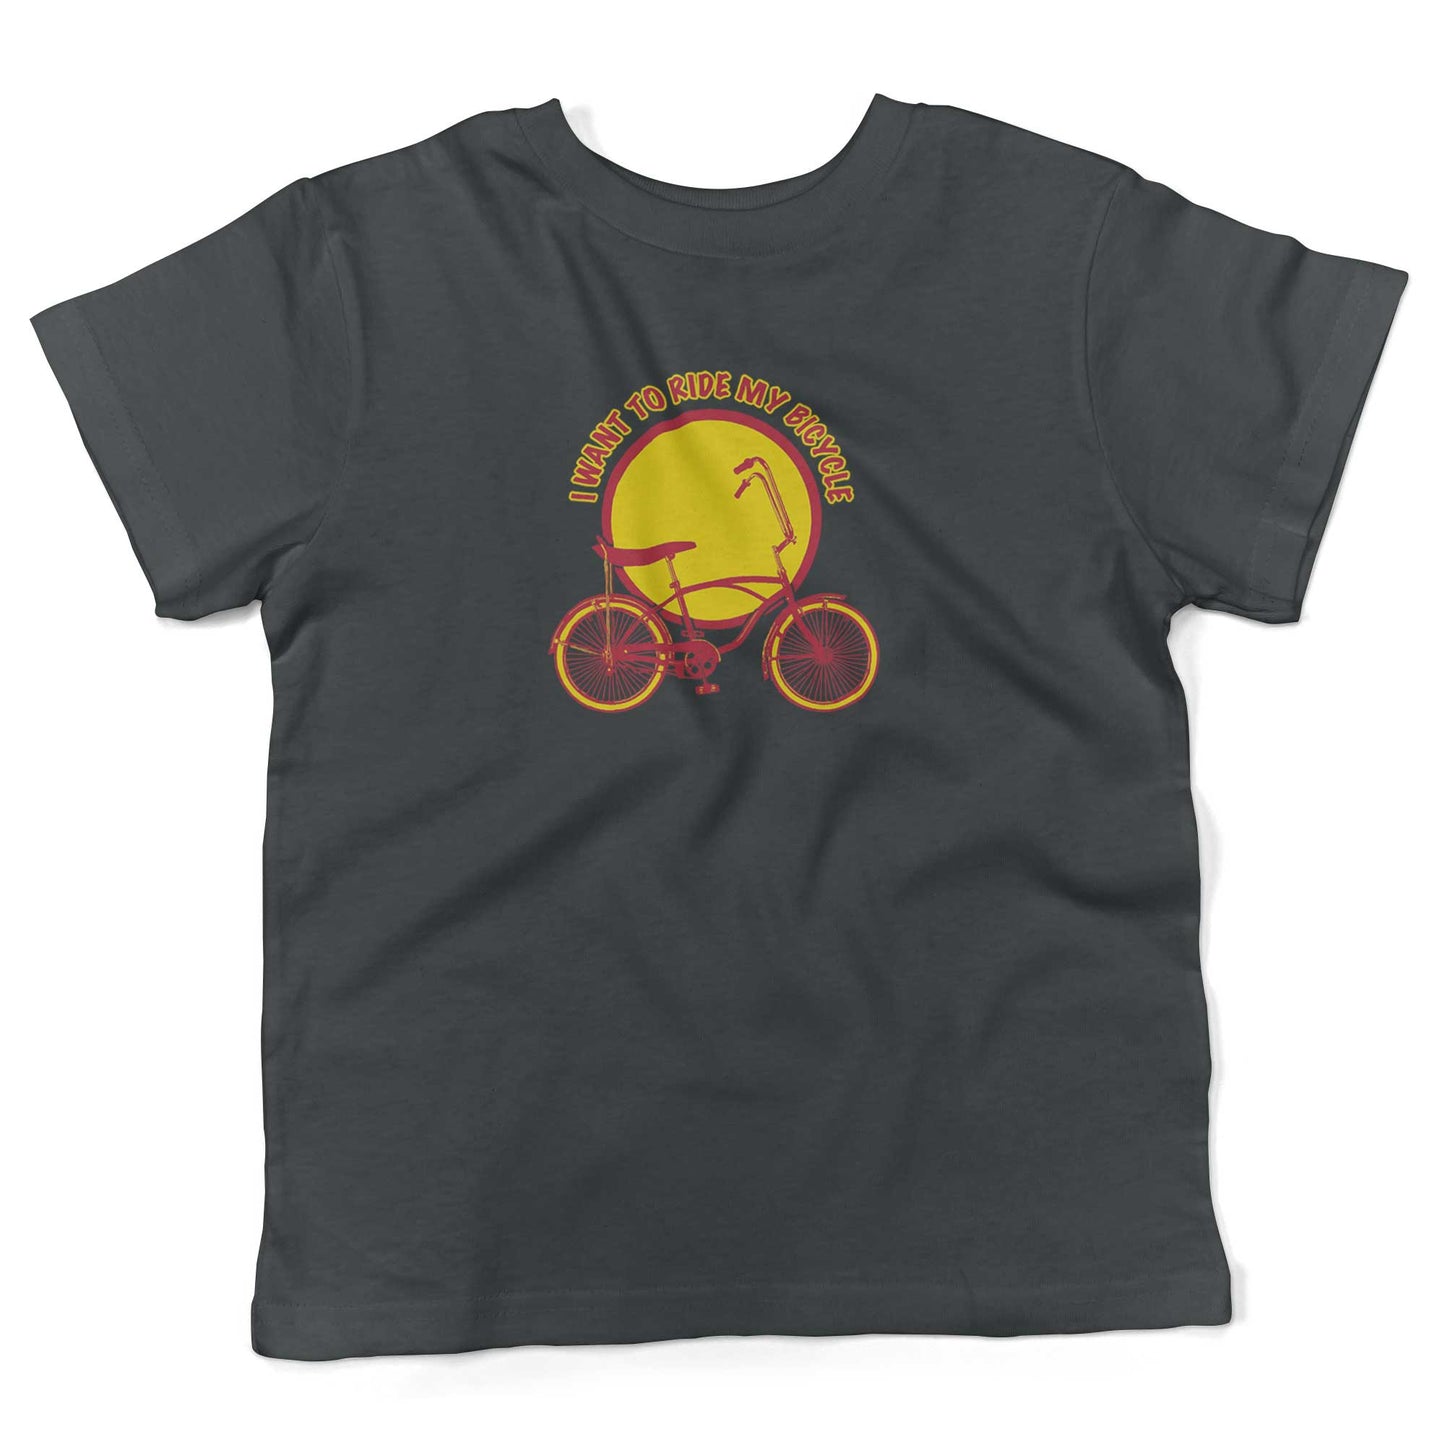 I Want To Ride My Bicycle Toddler Shirt-Asphalt-2T